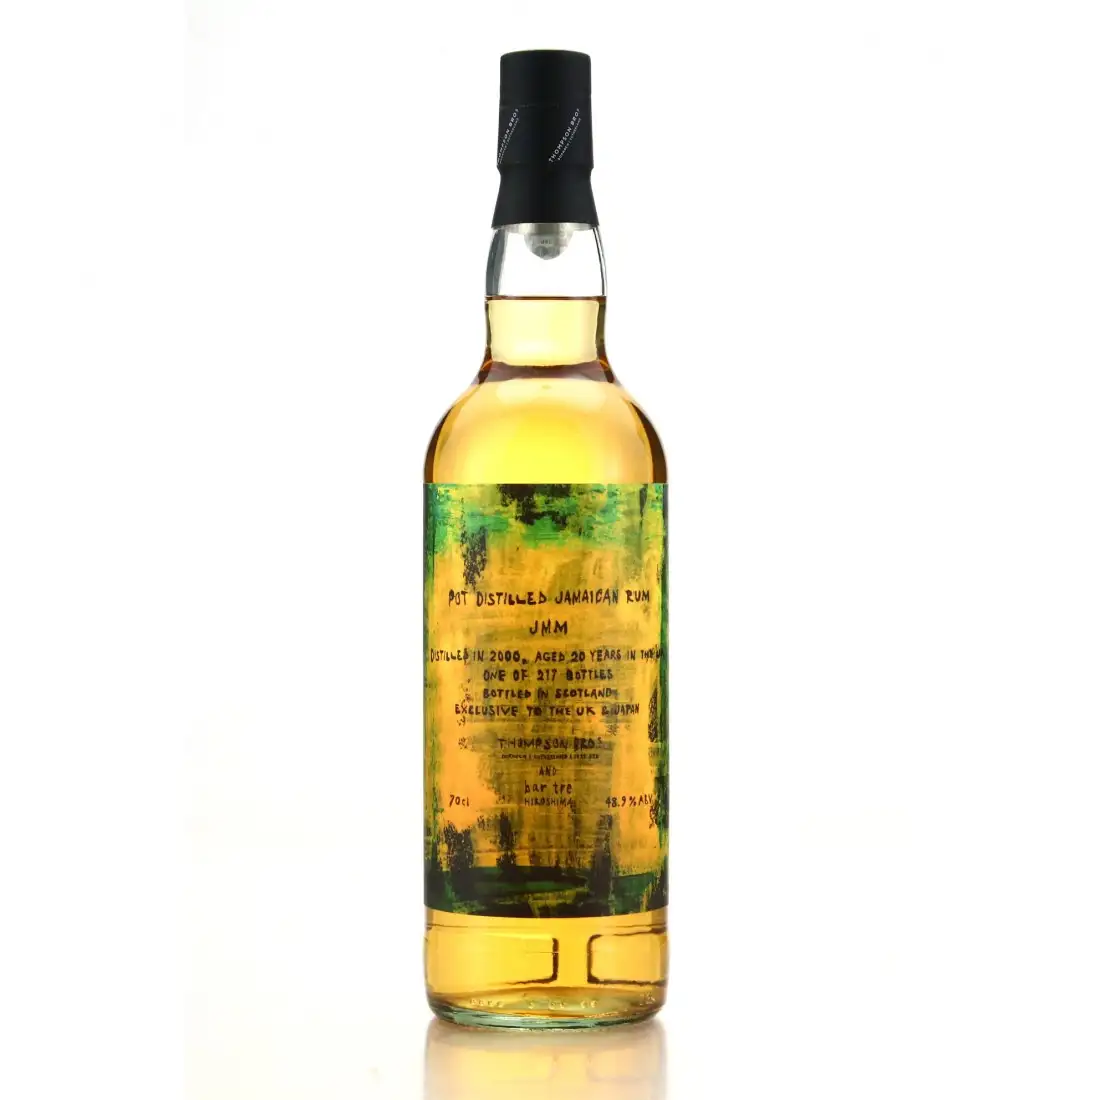 Image of the front of the bottle of the rum Pot Distilled Jamaican Rum (Bar Tre) JMM